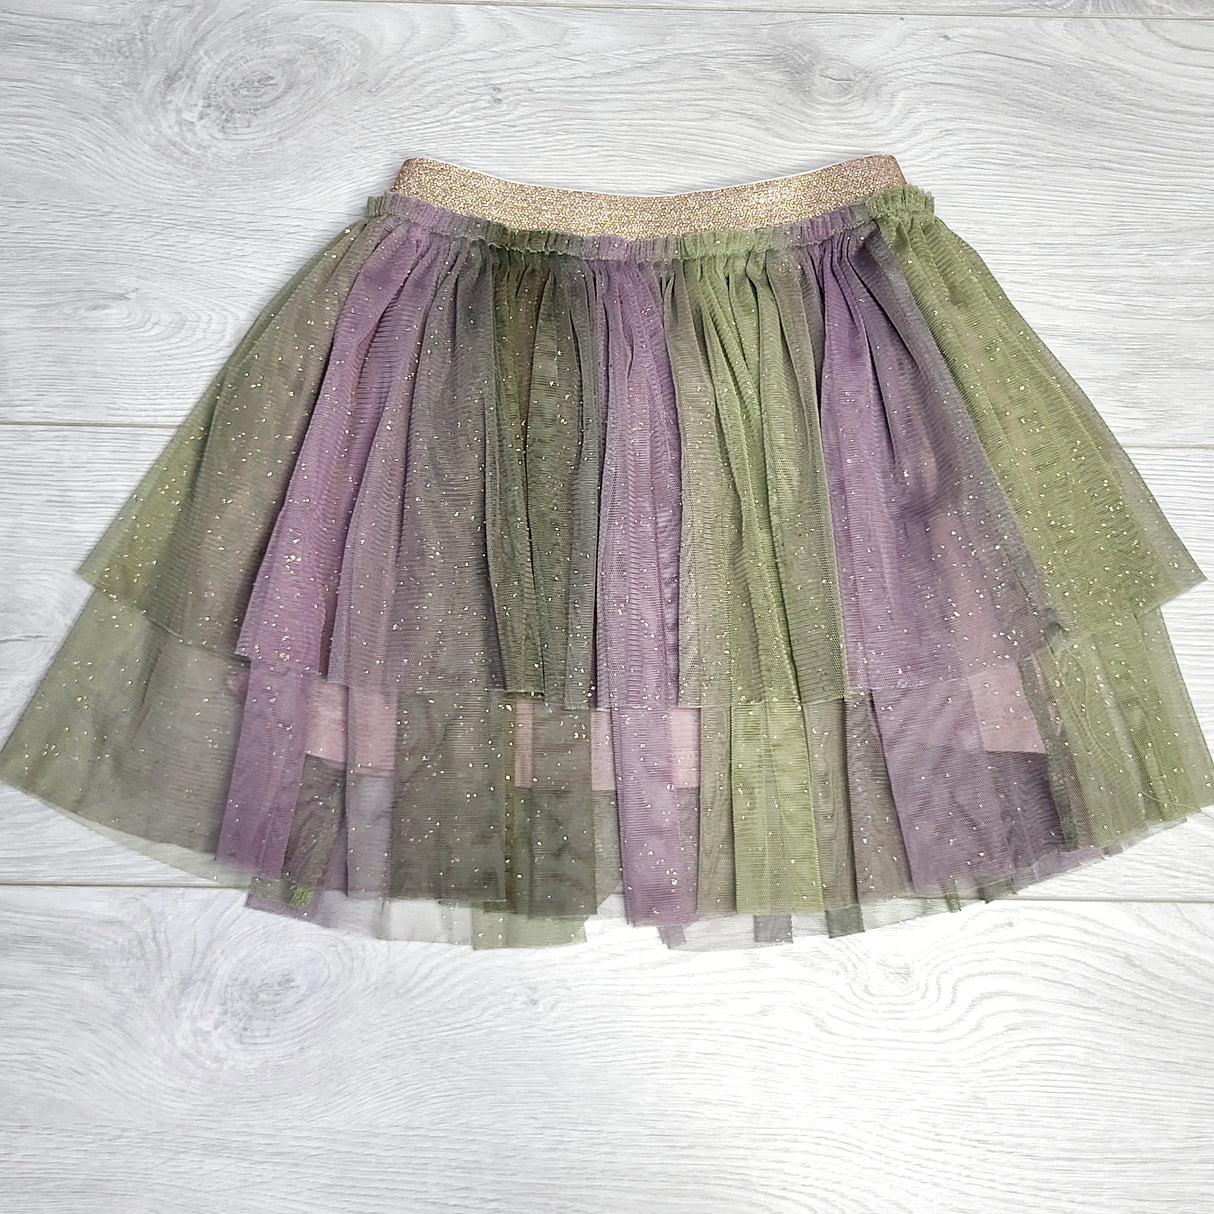 HWIL1 - Minymo multi-colured tulle skirt. Size 4T